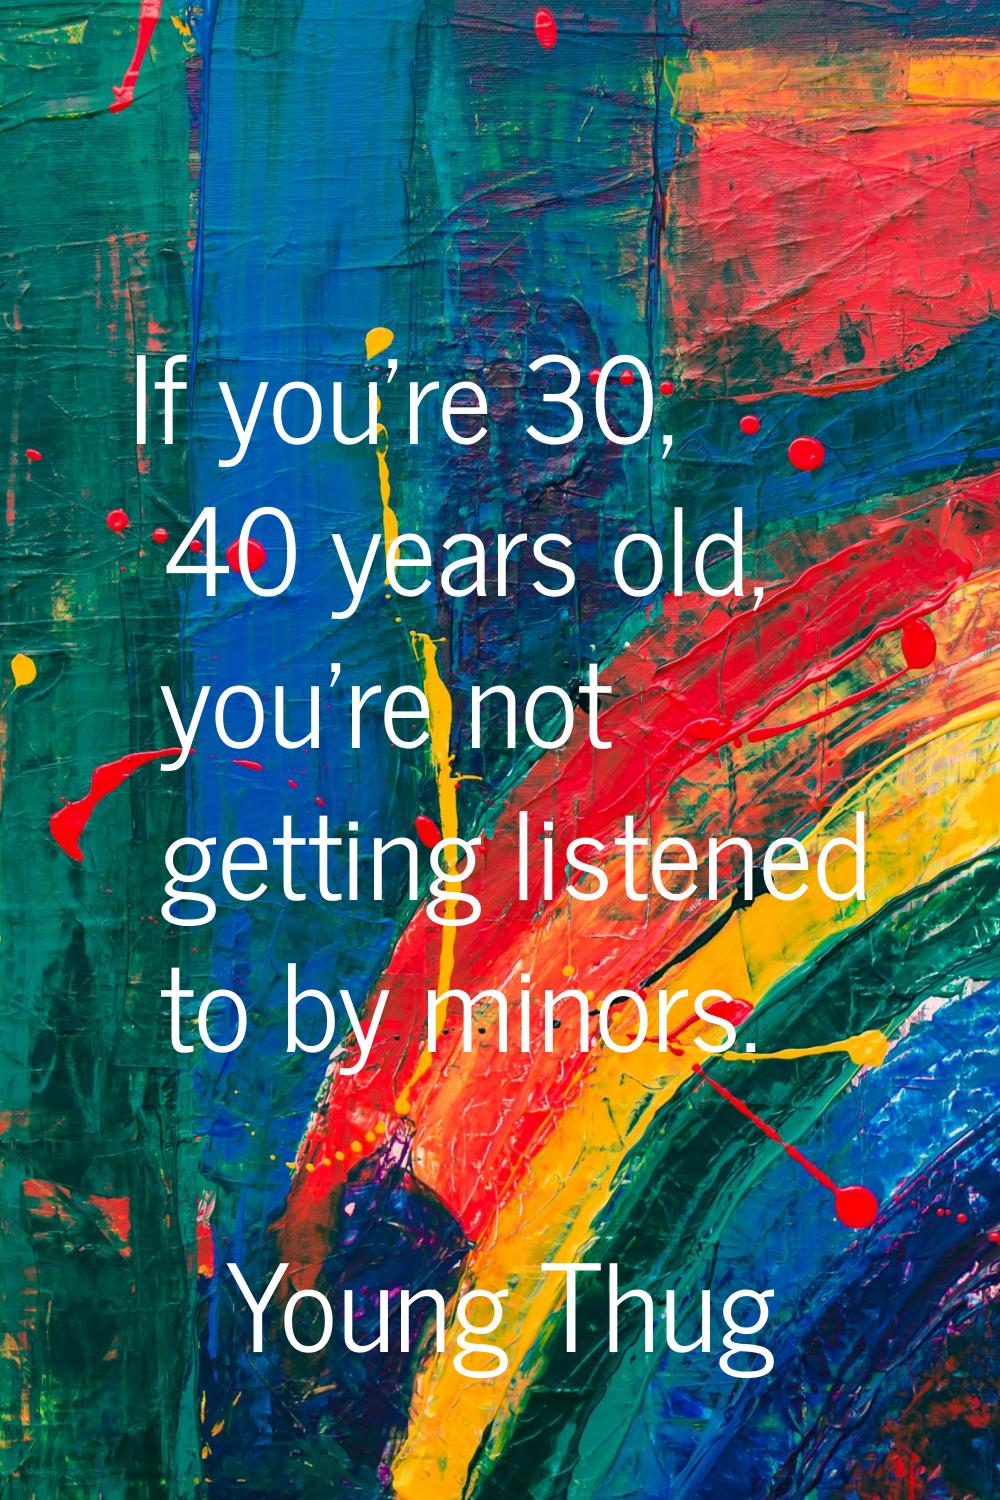 If you're 30, 40 years old, you're not getting listened to by minors.